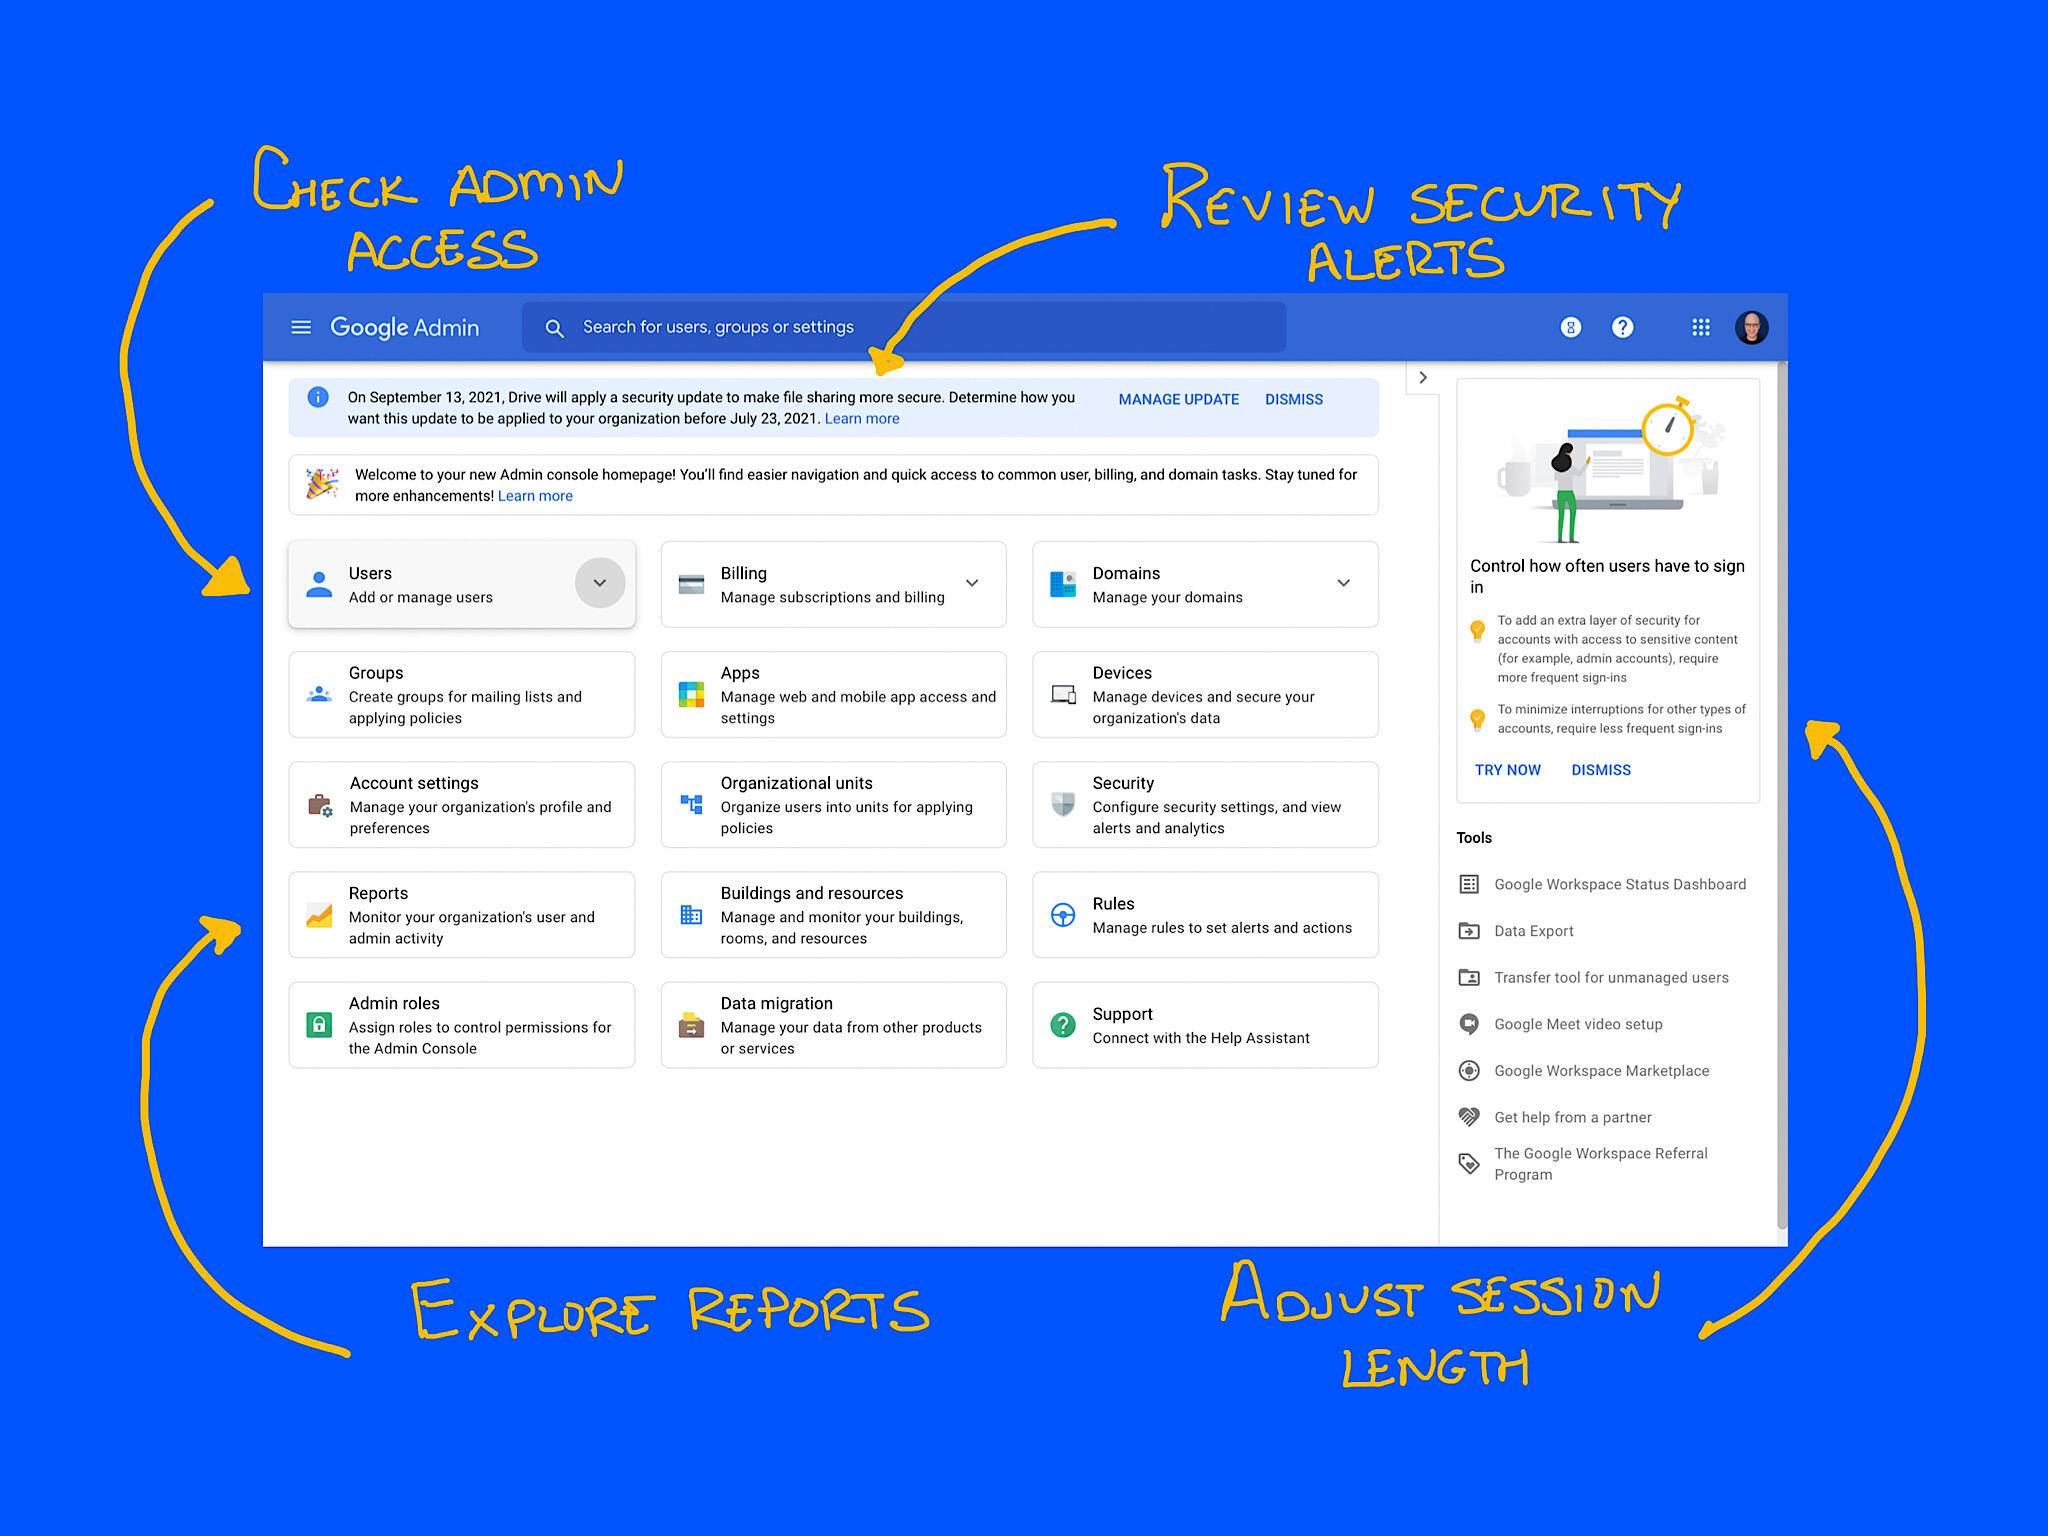 Screenshot from Google Workspace Admin page, with four arrows pointing to covered features: Check admin access; Review security alerts; Adjust session length, Explore reports.